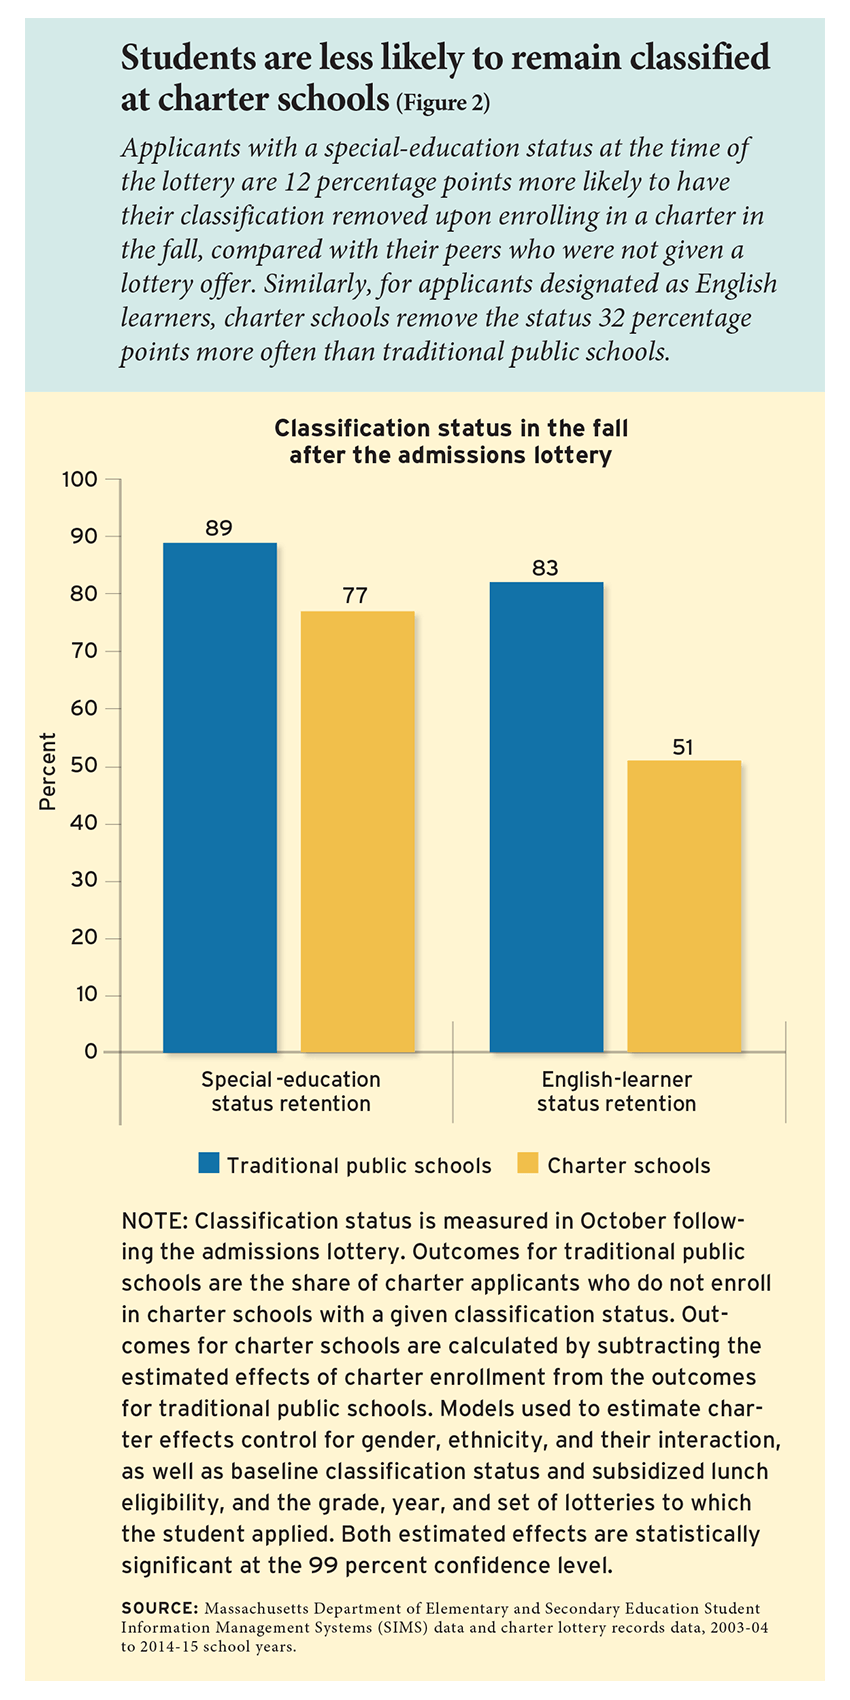 Students are less likely to remain classified at charter schools (Figure 2)